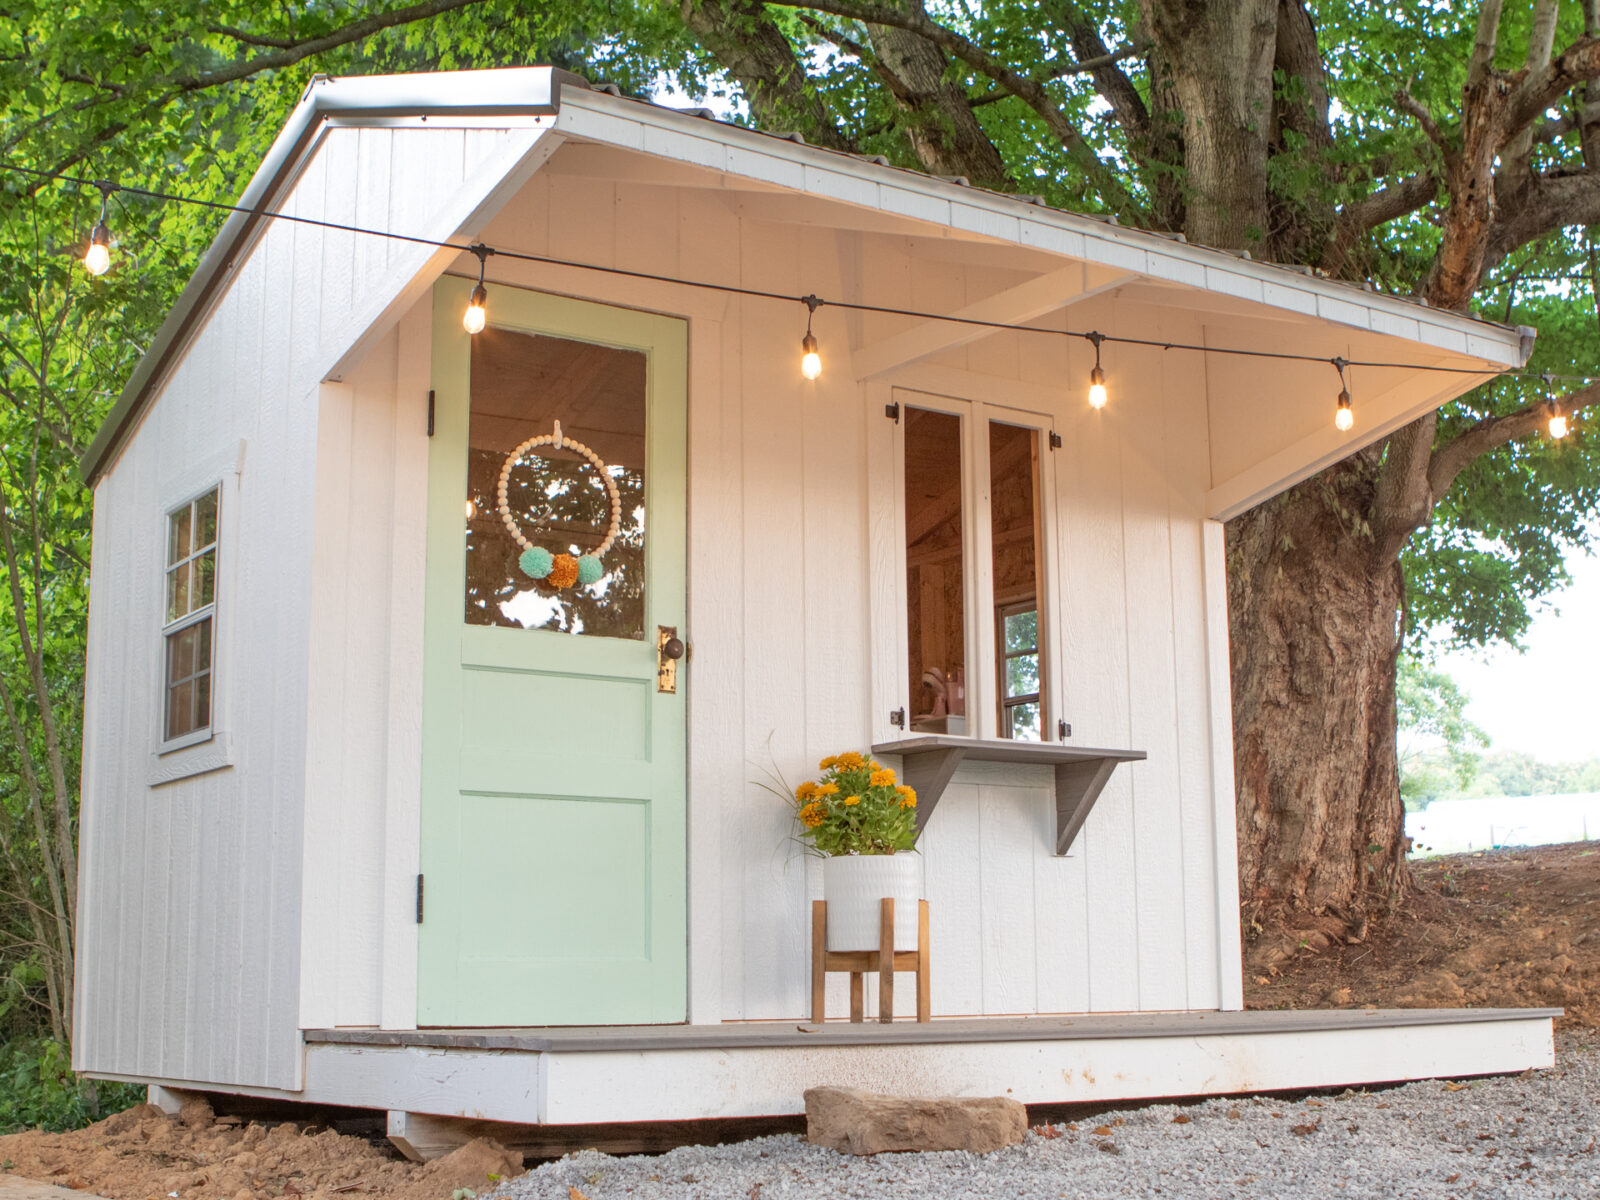 a playhouse available in ky and tn